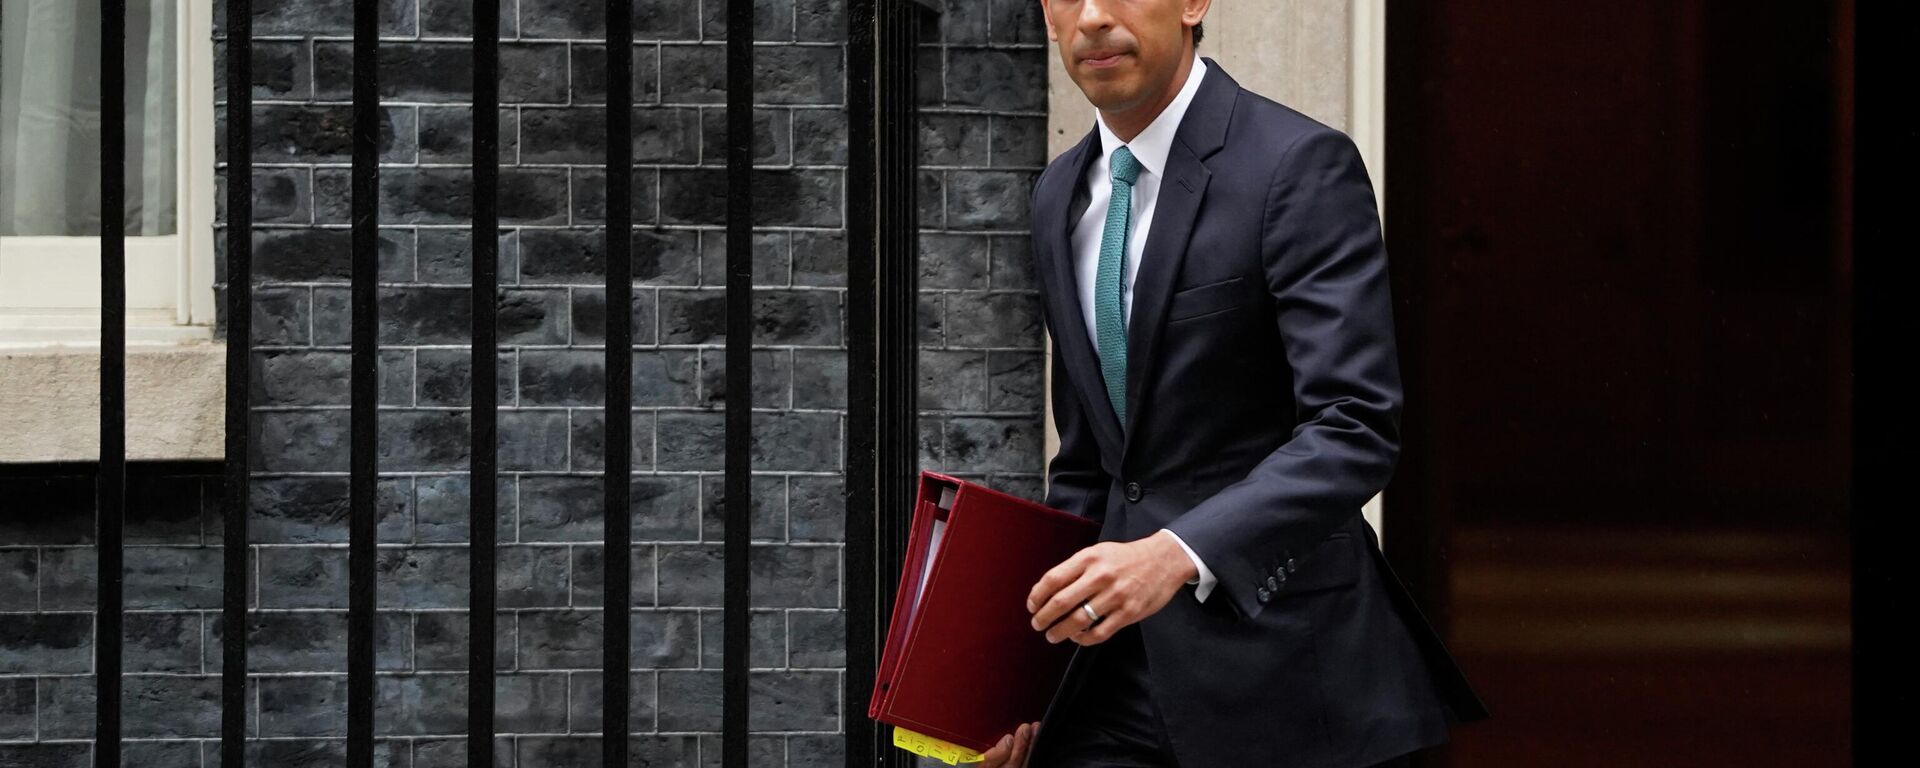 Britain's Prime Minister Rishi Sunak leaves 10 Downing Street in central London on October 26, 2022, for the House of Commons to take part in his first Prime Minister's Questions (PMQs). - Sputnik International, 1920, 26.10.2022